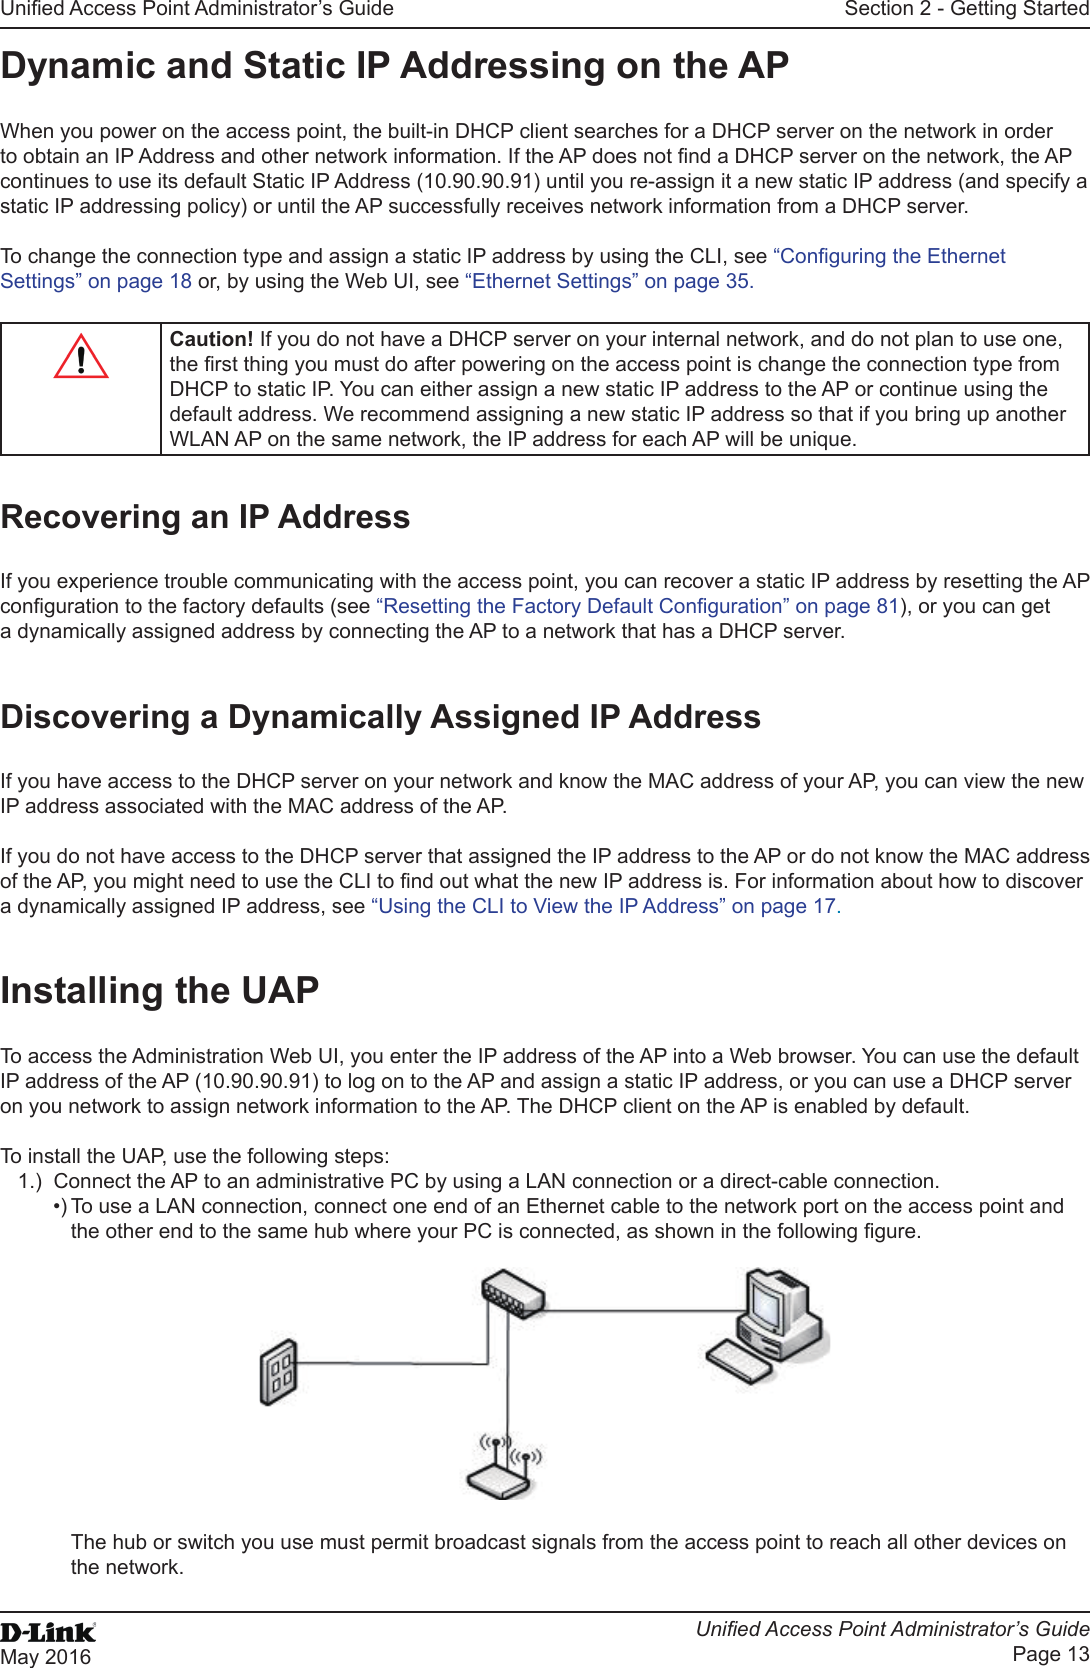 Unied Access Point Administrator’s GuideUnied Access Point Administrator’s GuidePage 13May 2016Section 2 - Getting StartedDynamic and Static IP Addressing on the APWhen you power on the access point, the built-in DHCP client searches for a DHCP server on the network in order to obtain an IP Address and other network information. If the AP does not nd a DHCP server on the network, the AP continues to use its default Static IP Address (10.90.90.91) until you re-assign it a new static IP address (and specify a static IP addressing policy) or until the AP successfully receives network information from a DHCP server.To change the connection type and assign a static IP address by using the CLI, see “Conguring the Ethernet Settings” on page 18 or, by using the Web UI, see “Ethernet Settings” on page 35.Caution! If you do not have a DHCP server on your internal network, and do not plan to use one, the rst thing you must do after powering on the access point is change the connection type from DHCP to static IP. You can either assign a new static IP address to the AP or continue using the default address. We recommend assigning a new static IP address so that if you bring up another WLAN AP on the same network, the IP address for each AP will be unique.Recovering an IP AddressIf you experience trouble communicating with the access point, you can recover a static IP address by resetting the AP conguration to the factory defaults (see “Resetting the Factory Default Conguration” on page 81), or you can get a dynamically assigned address by connecting the AP to a network that has a DHCP server.Discovering a Dynamically Assigned IP AddressIf you have access to the DHCP server on your network and know the MAC address of your AP, you can view the new IP address associated with the MAC address of the AP. If you do not have access to the DHCP server that assigned the IP address to the AP or do not know the MAC address of the AP, you might need to use the CLI to nd out what the new IP address is. For information about how to discover a dynamically assigned IP address, see “Using the CLI to View the IP Address” on page 17.Installing the UAPTo access the Administration Web UI, you enter the IP address of the AP into a Web browser. You can use the default IP address of the AP (10.90.90.91) to log on to the AP and assign a static IP address, or you can use a DHCP server on you network to assign network information to the AP. The DHCP client on the AP is enabled by default.To install the UAP, use the following steps:1.)  Connect the AP to an administrative PC by using a LAN connection or a direct-cable connection. •) To use a LAN connection, connect one end of an Ethernet cable to the network port on the access point and the other end to the same hub where your PC is connected, as shown in the following gure.The hub or switch you use must permit broadcast signals from the access point to reach all other devices on the network.